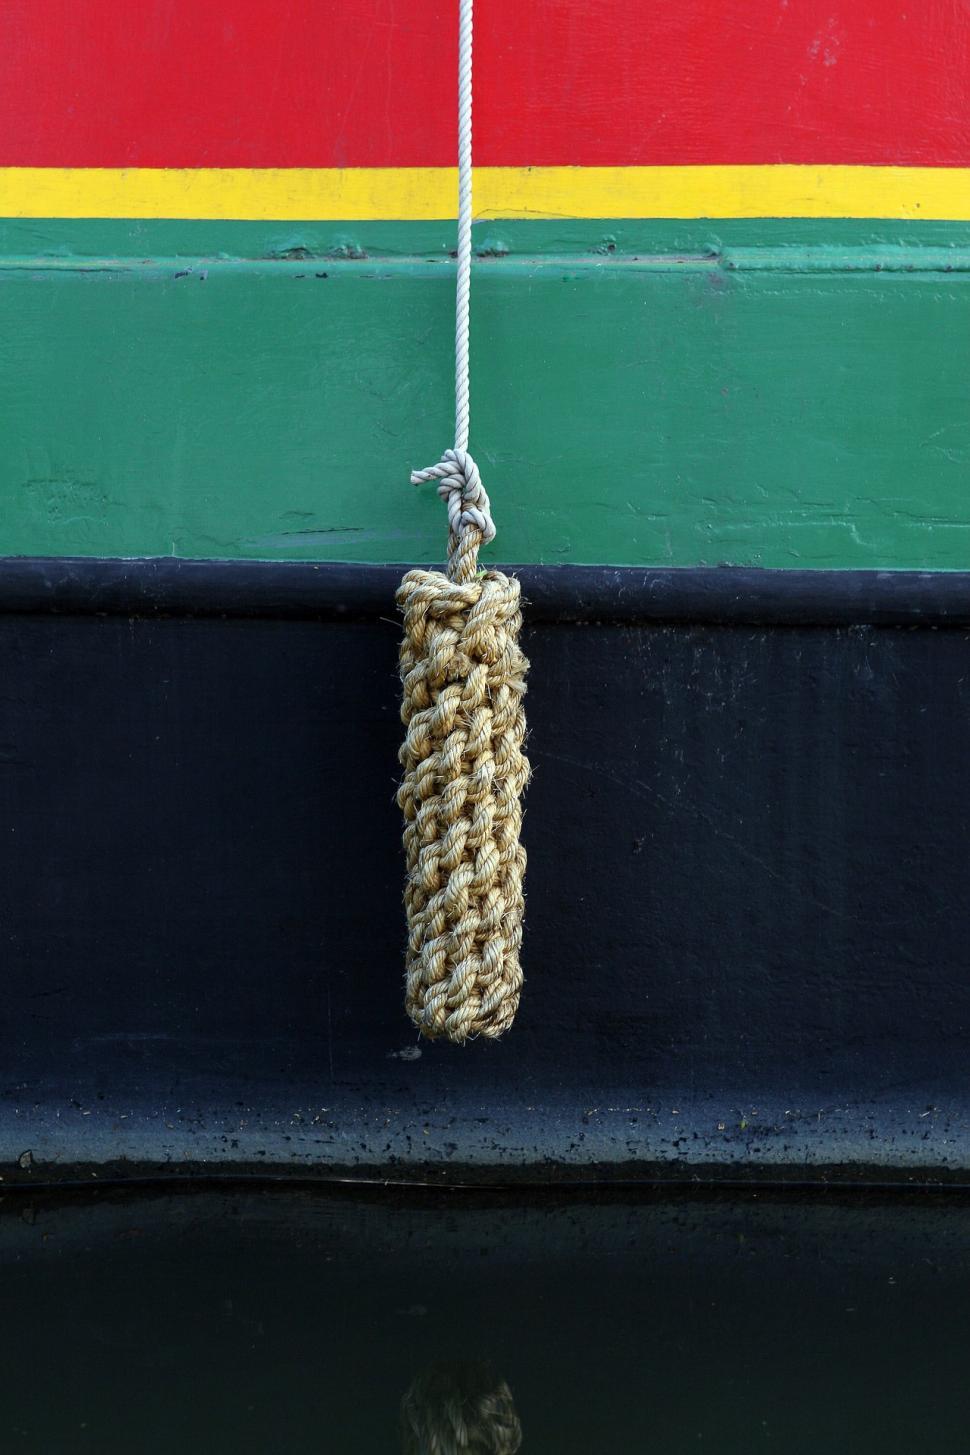 Free Image of Rope Hanging From the Side of a Boat 